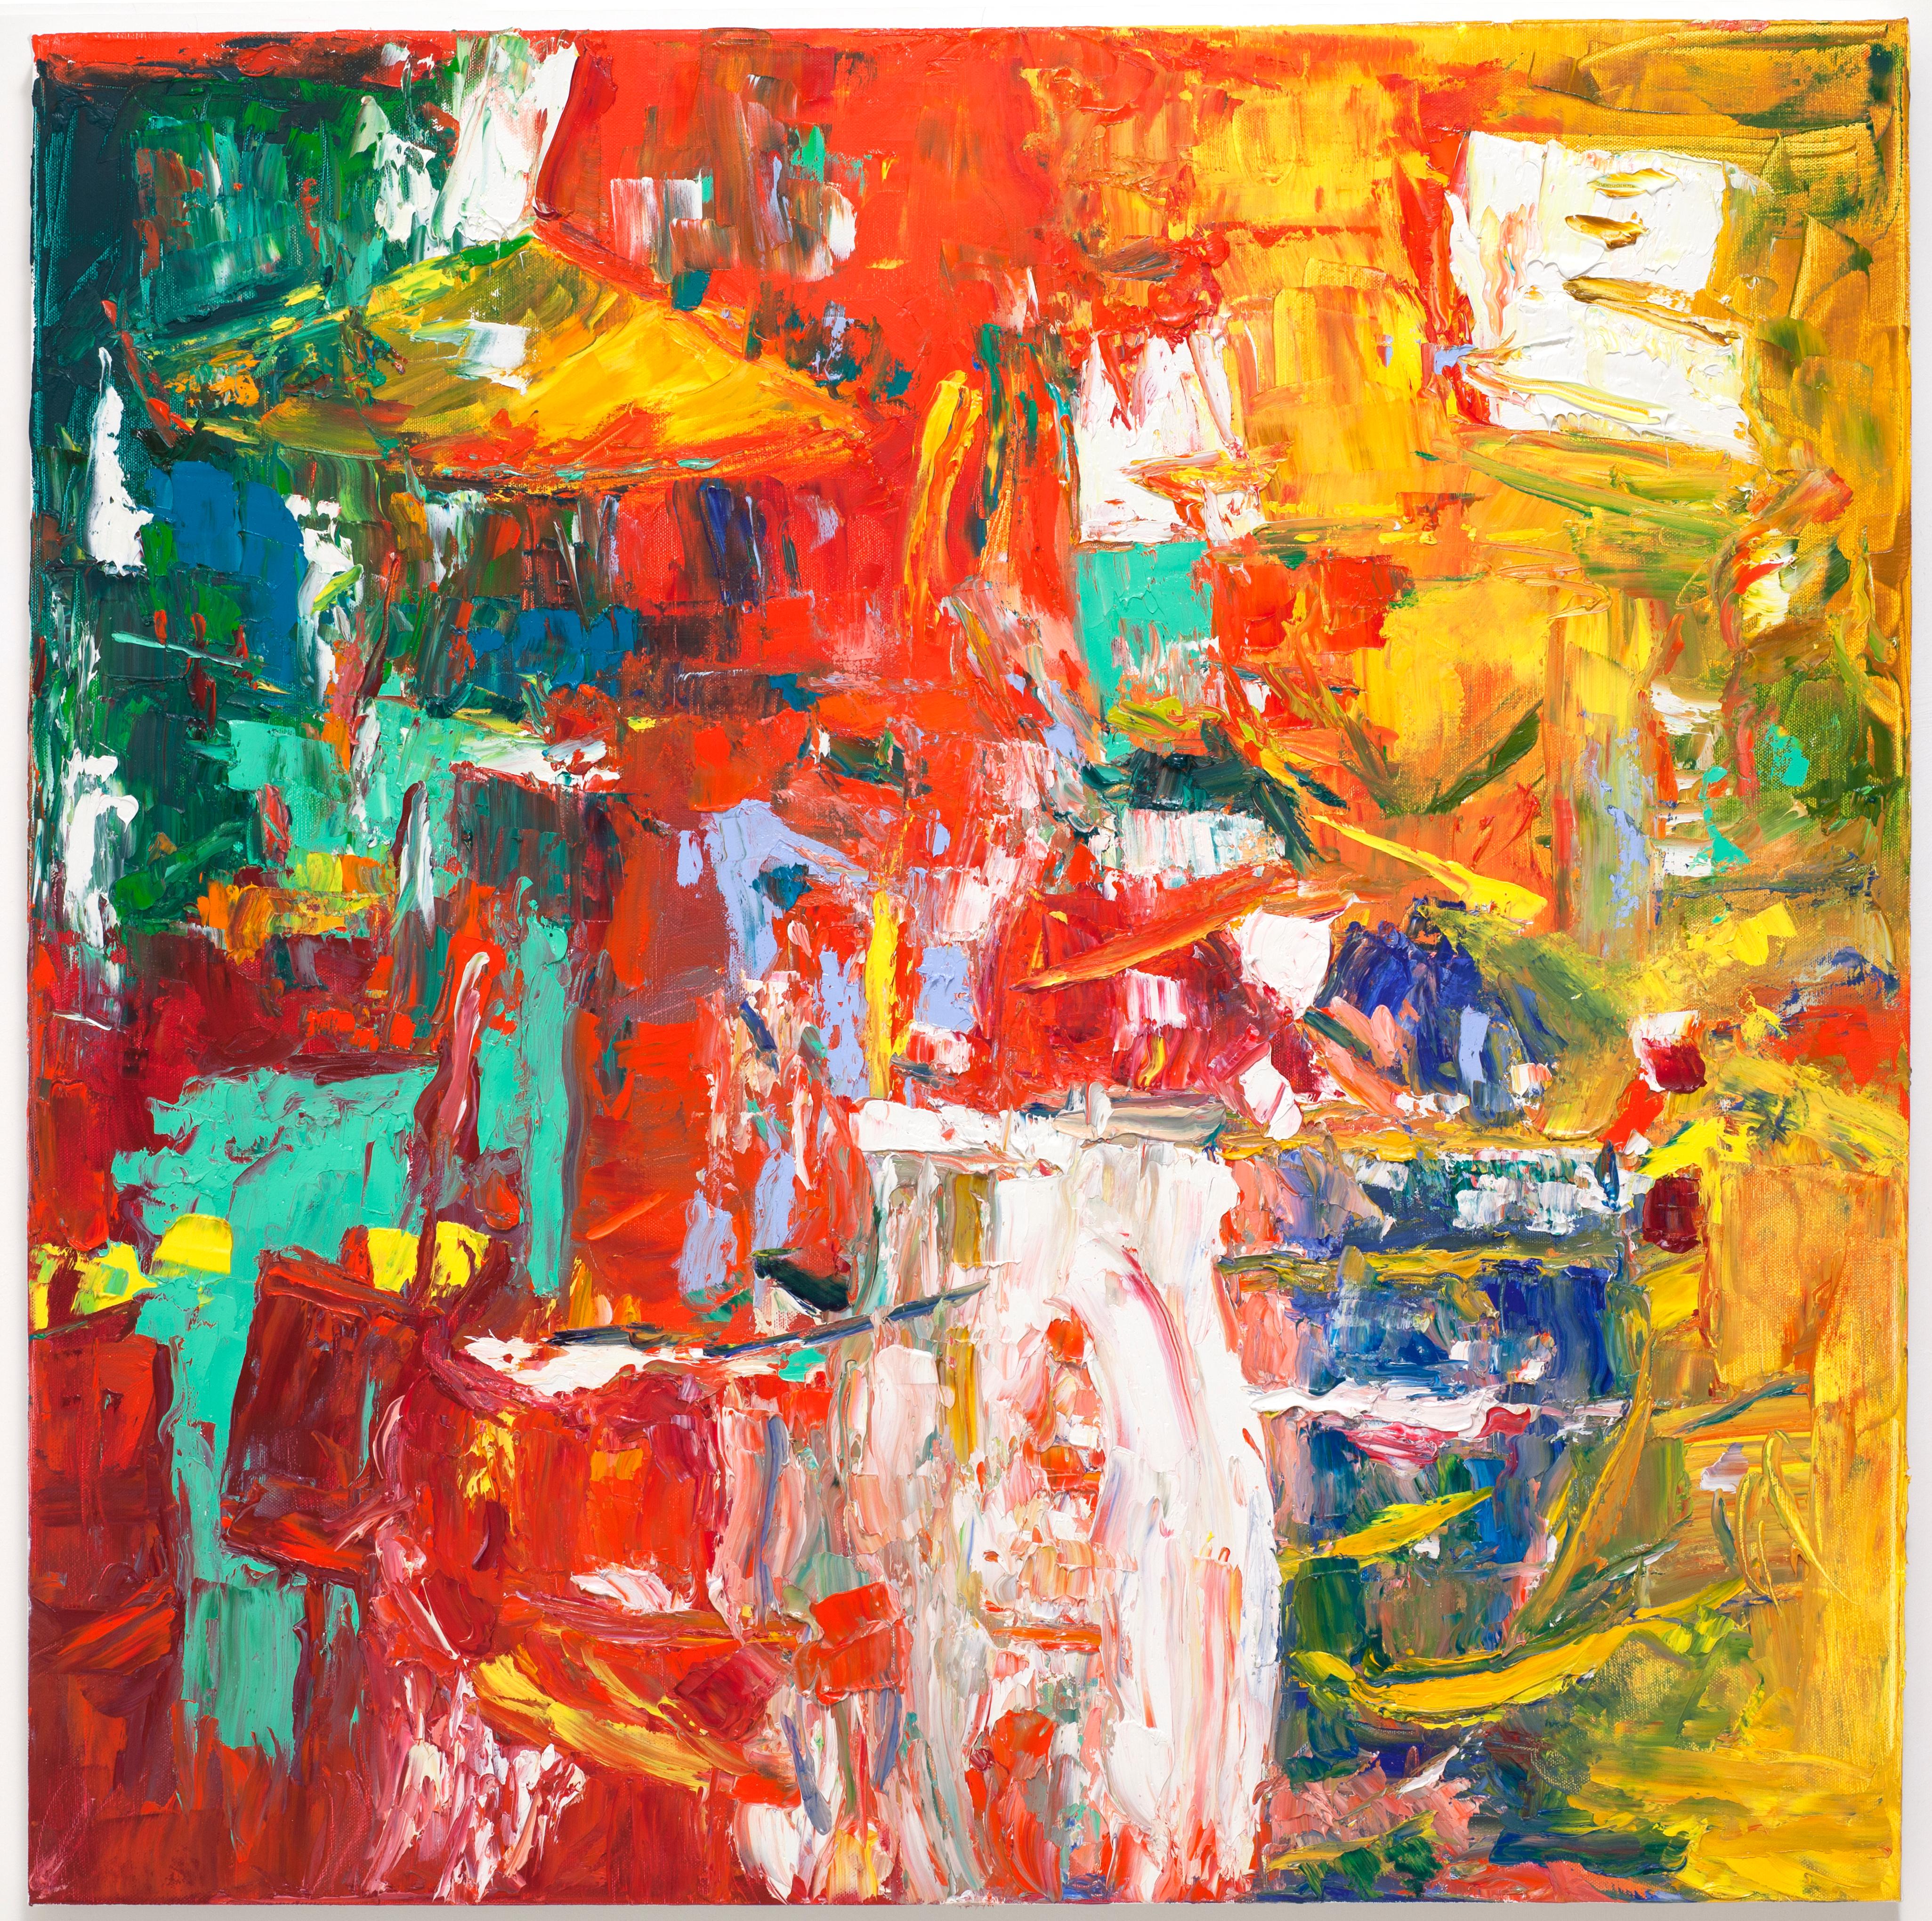 Linda Holt Abstract Painting - "Untitled" Large Abstract Expressionist Red Orange Yellow Bold Colorful